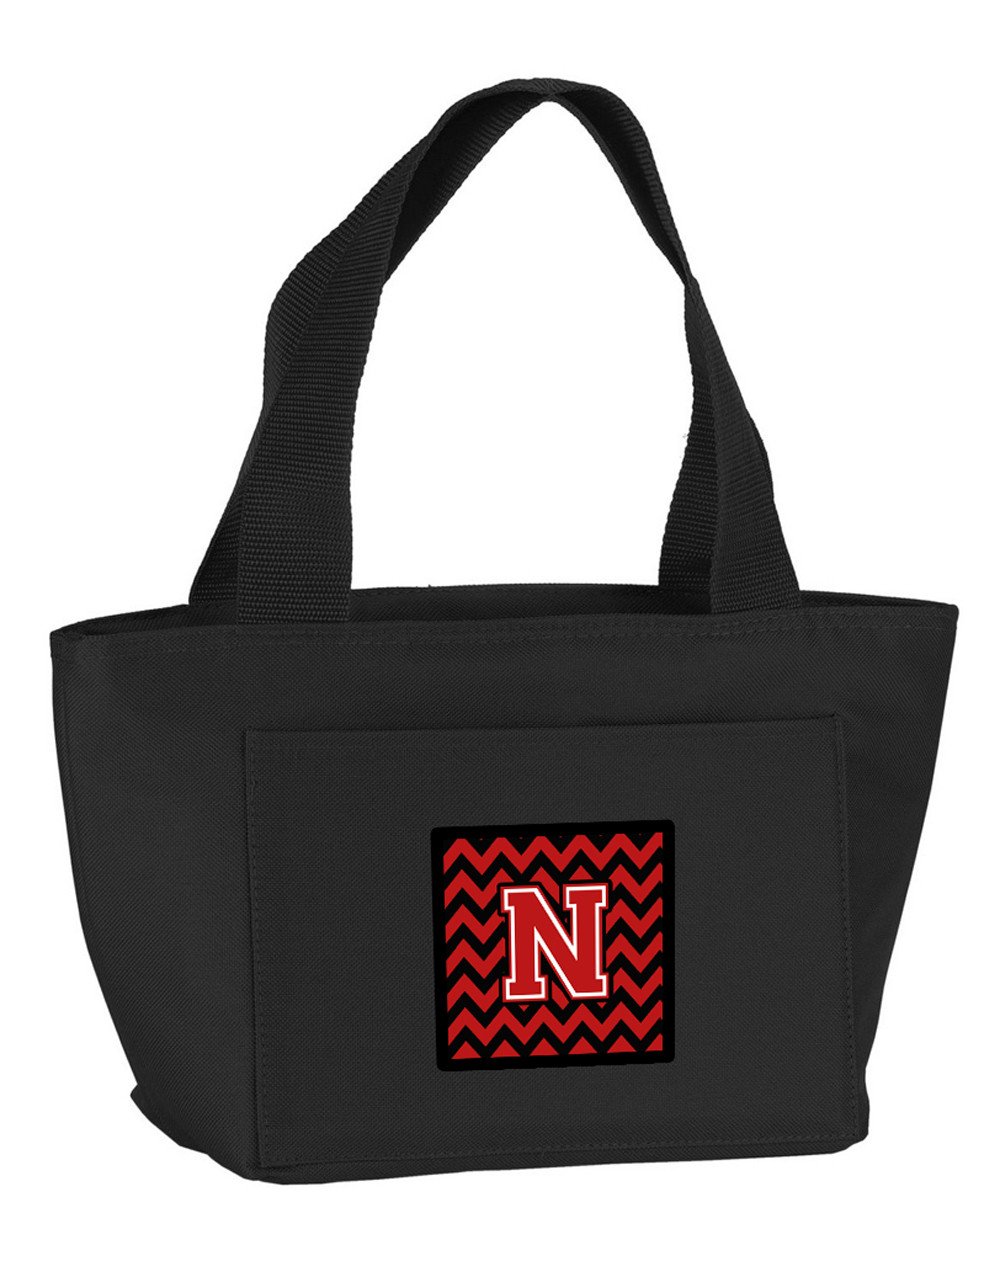 Letter N Chevron Black and Red   Lunch Bag CJ1047-NBK-8808